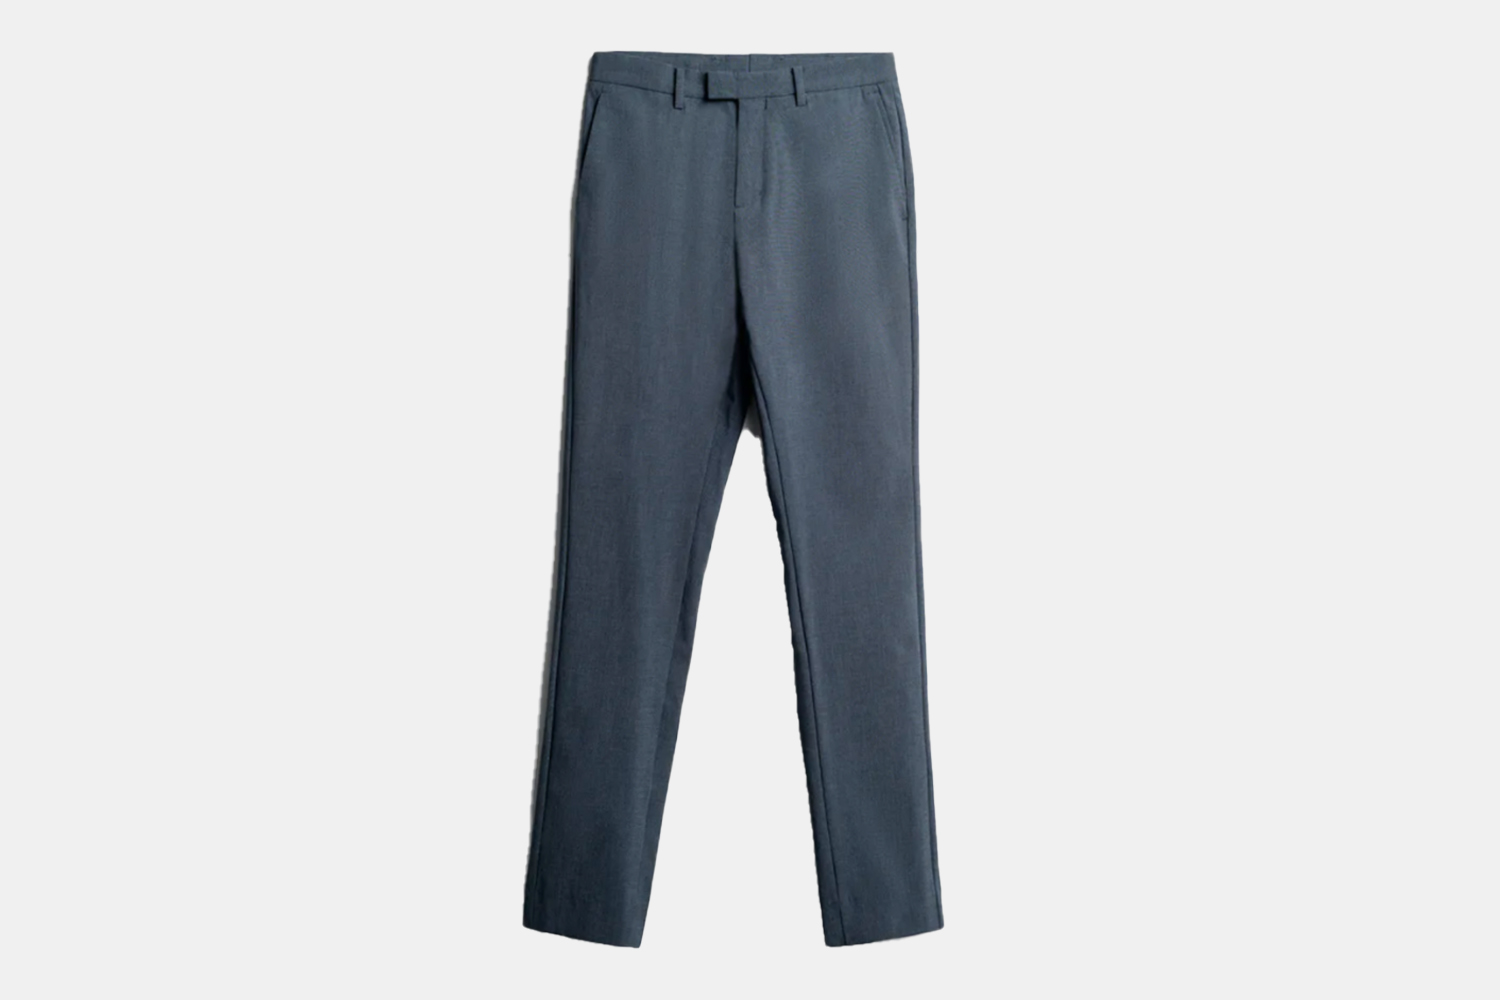 a pair of tabbed, navy houndstooth trousers.